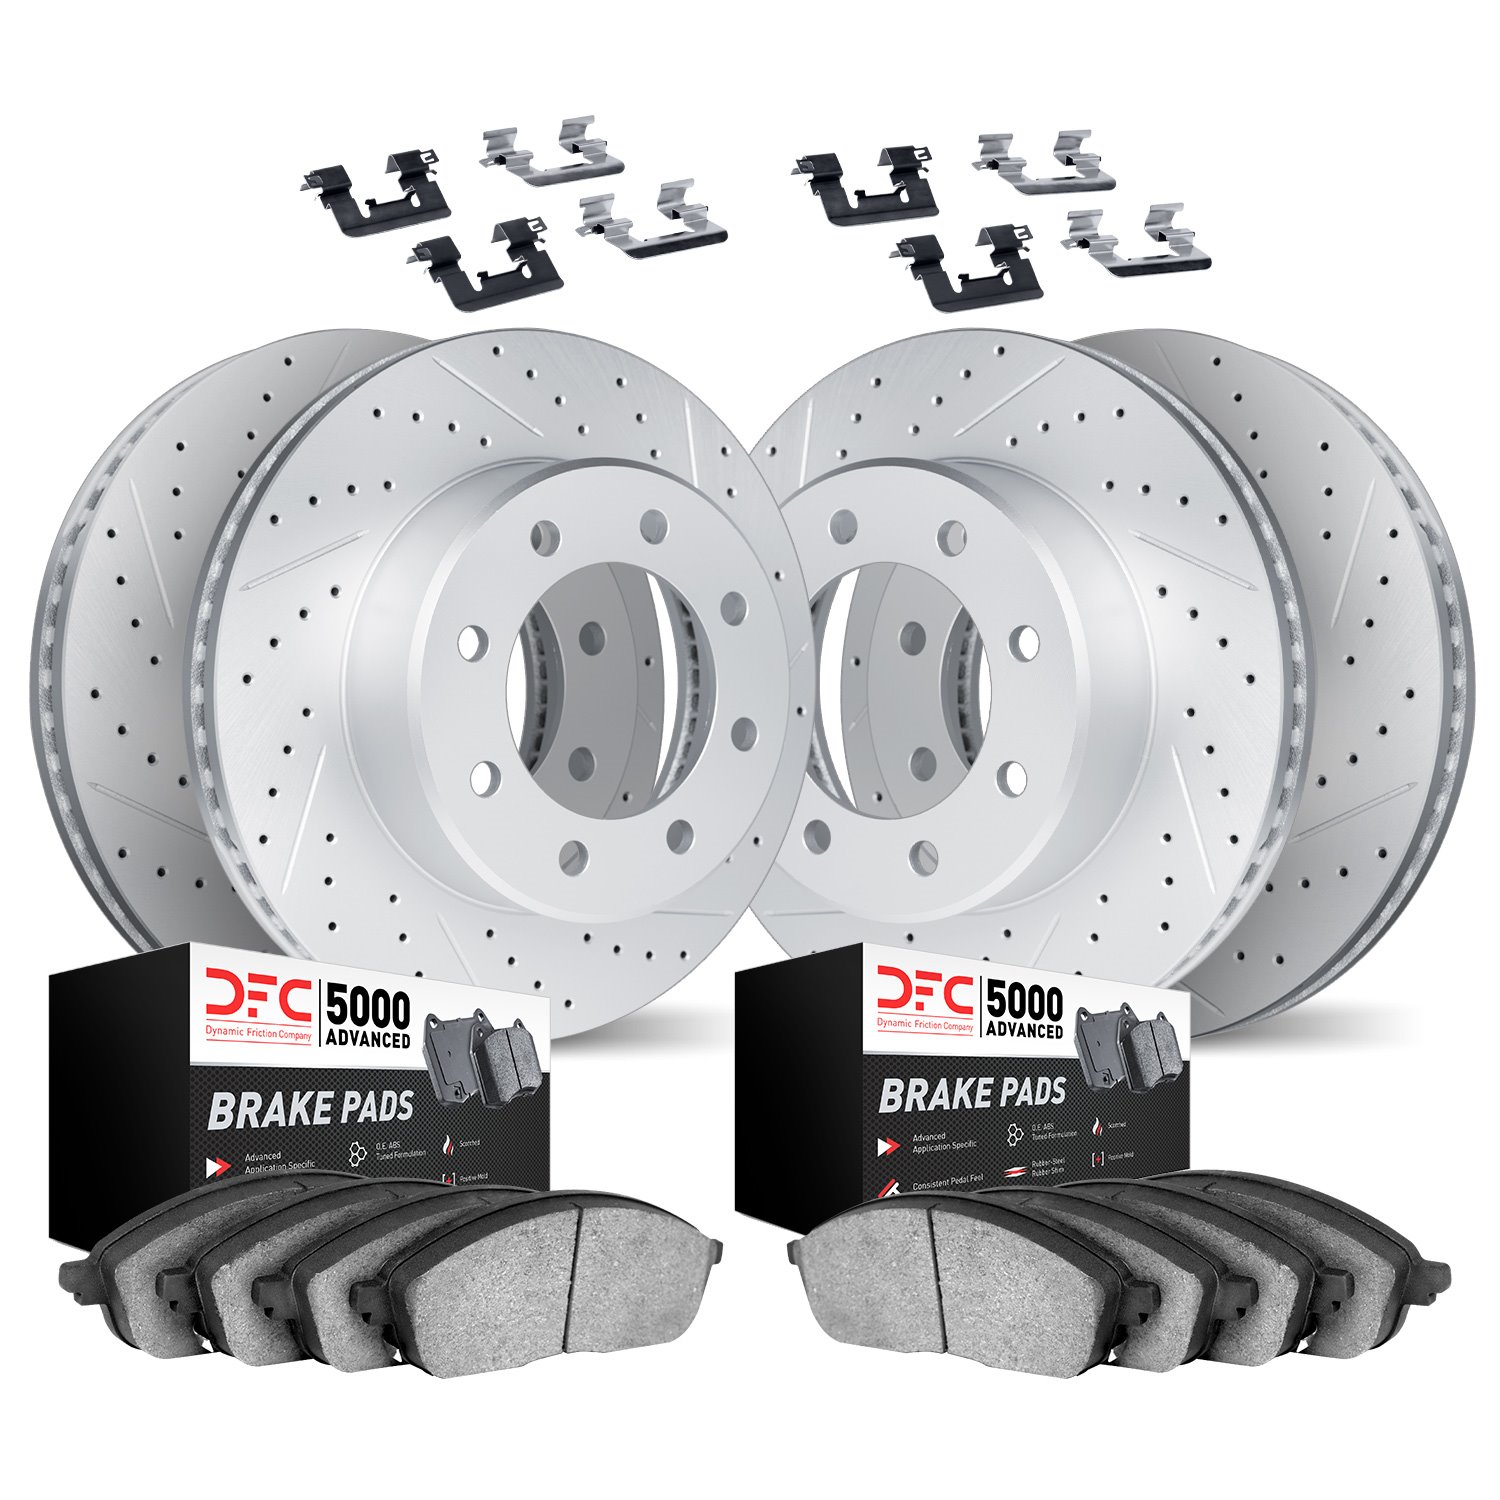 2514-54263 Geoperformance Drilled/Slotted Rotors w/5000 Advanced Brake Pads Kit & Hardware, Fits Select Ford/Lincoln/Mercury/Maz